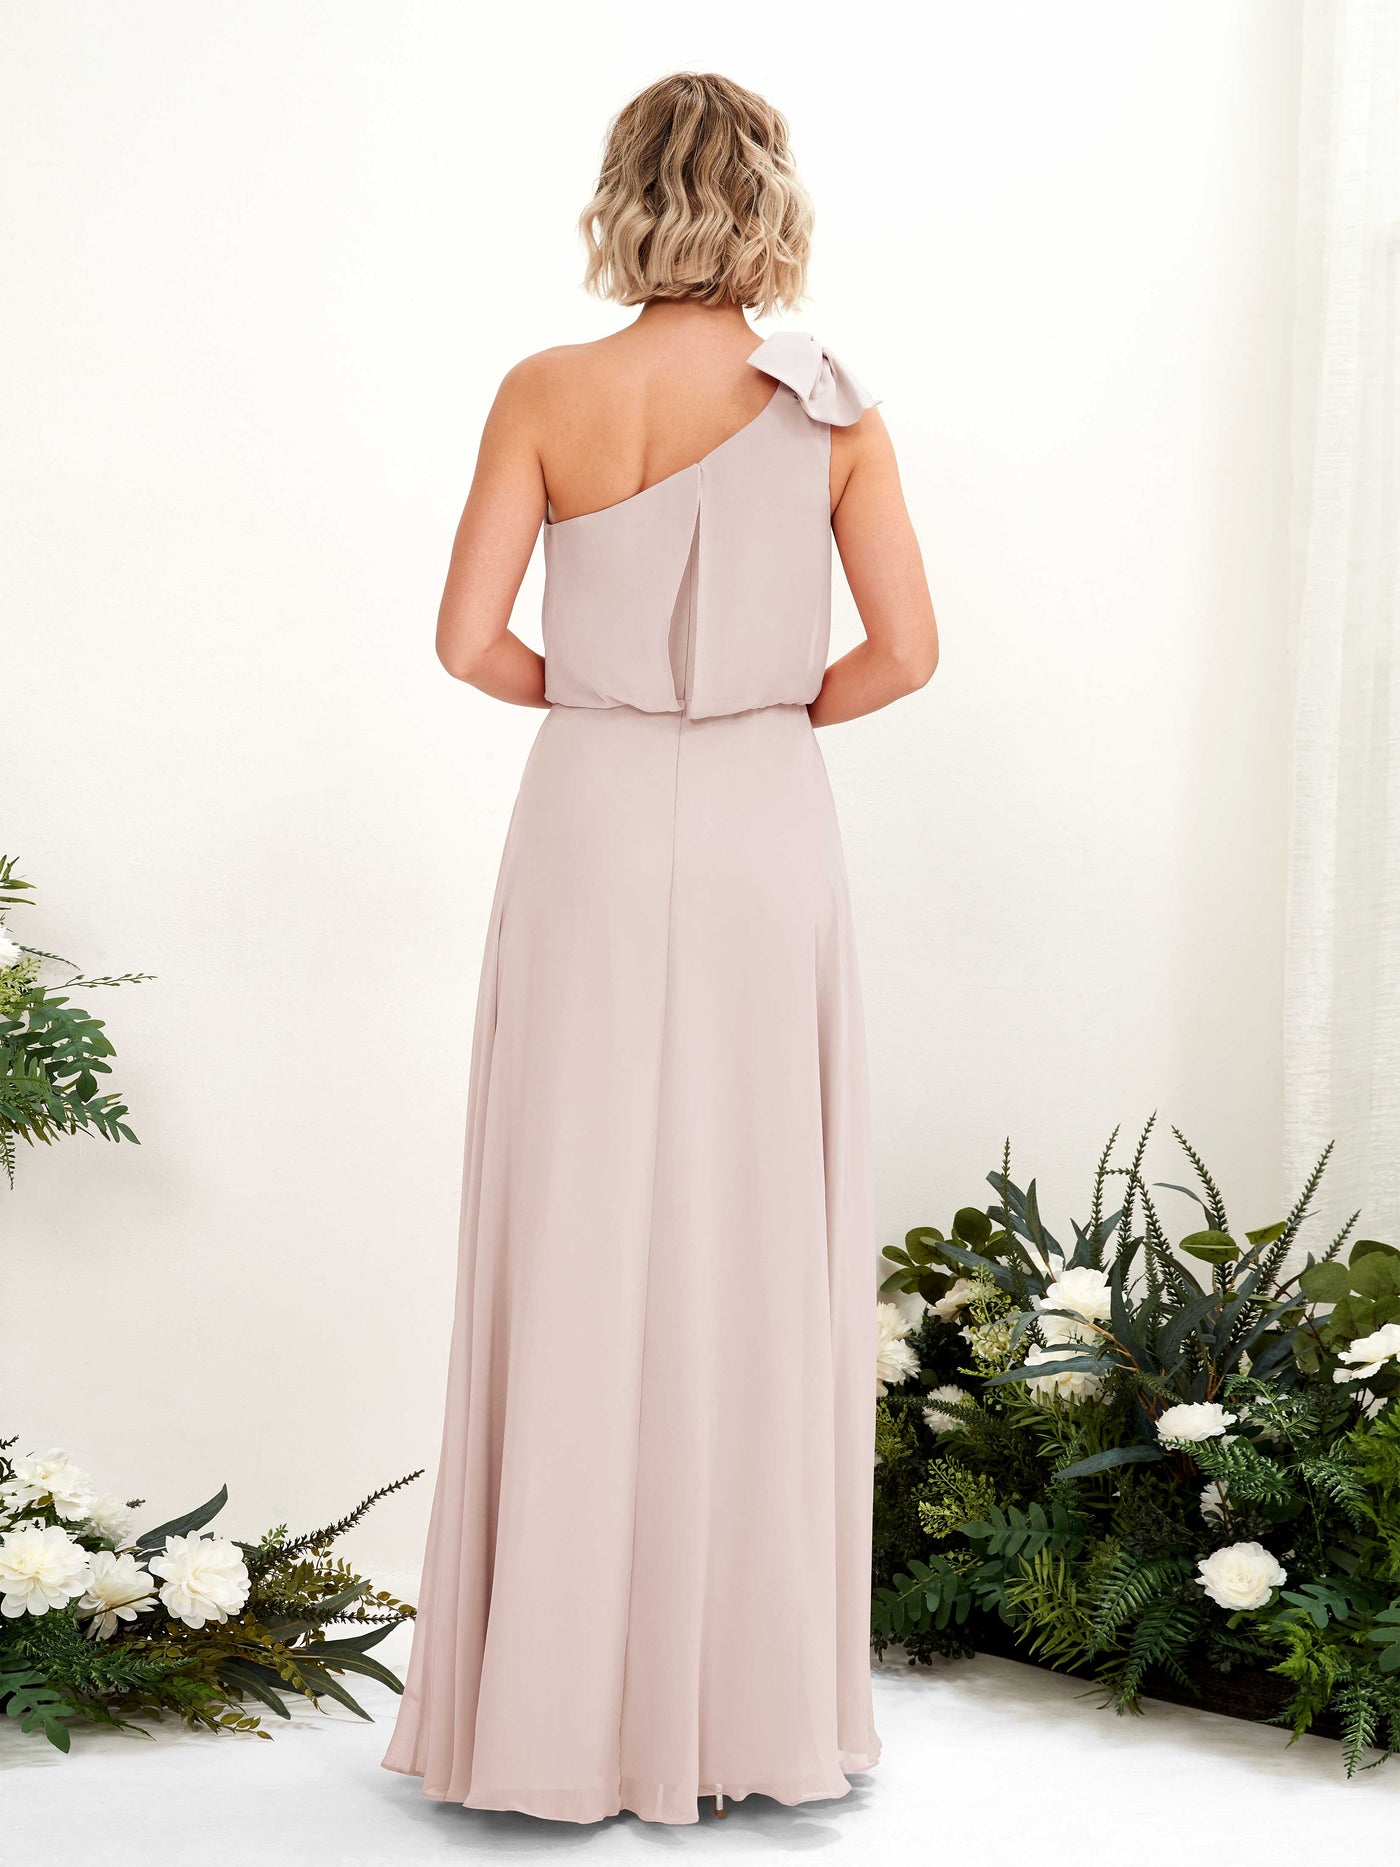 Biscotti Bridesmaid Dresses Bridesmaid Dress A-line Chiffon One Shoulder Full Length Sleeveless Wedding Party Dress (81225535)#color_biscotti